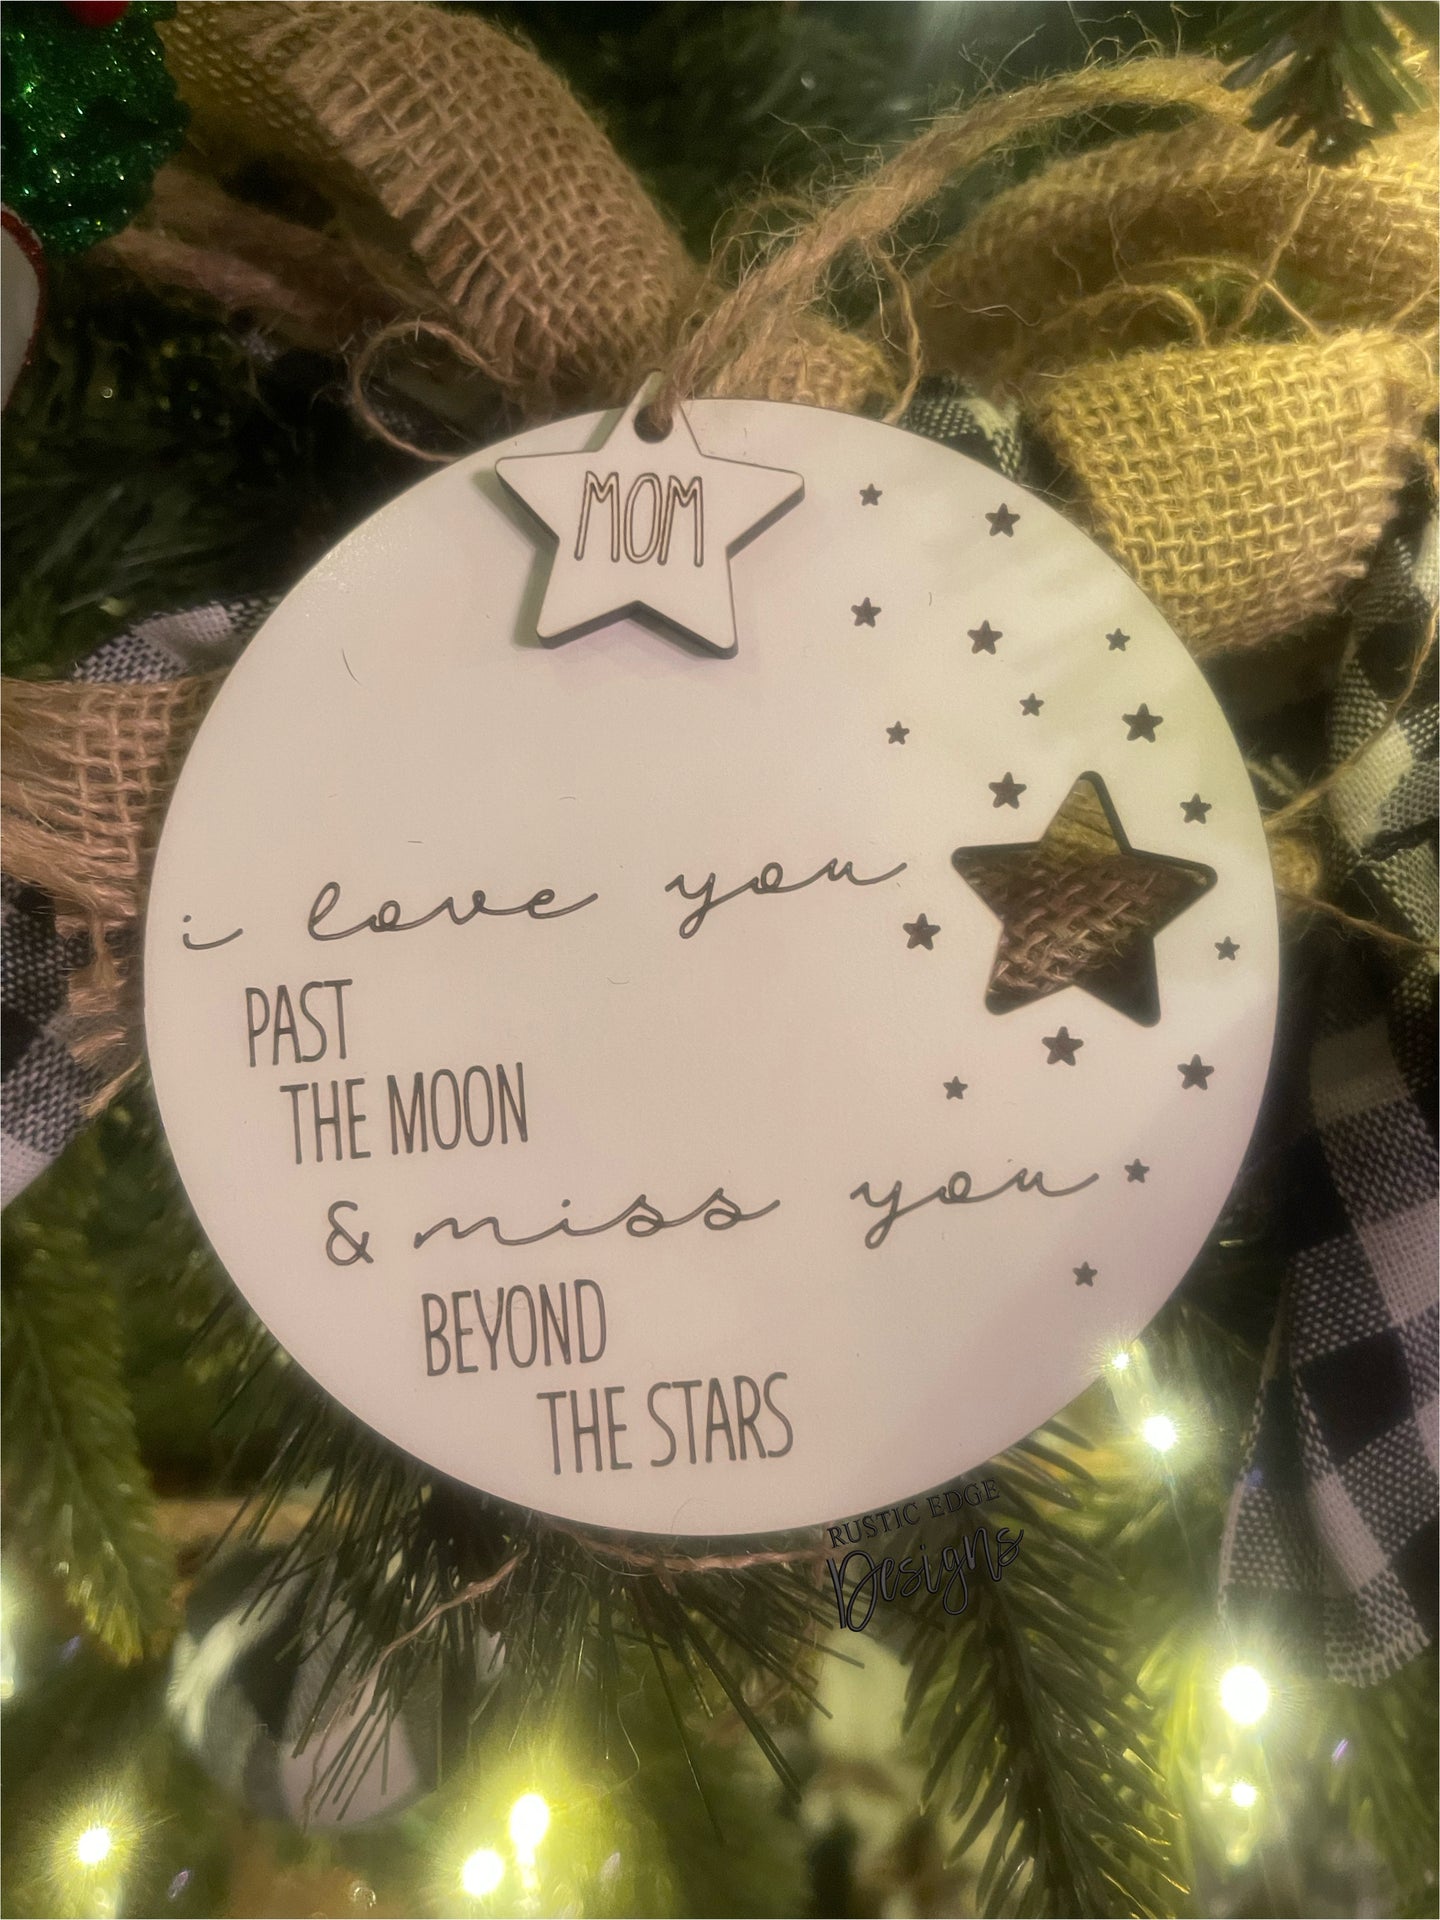 I Love You Past The Moon & Miss You Beyond The Stars Wooden Ornament